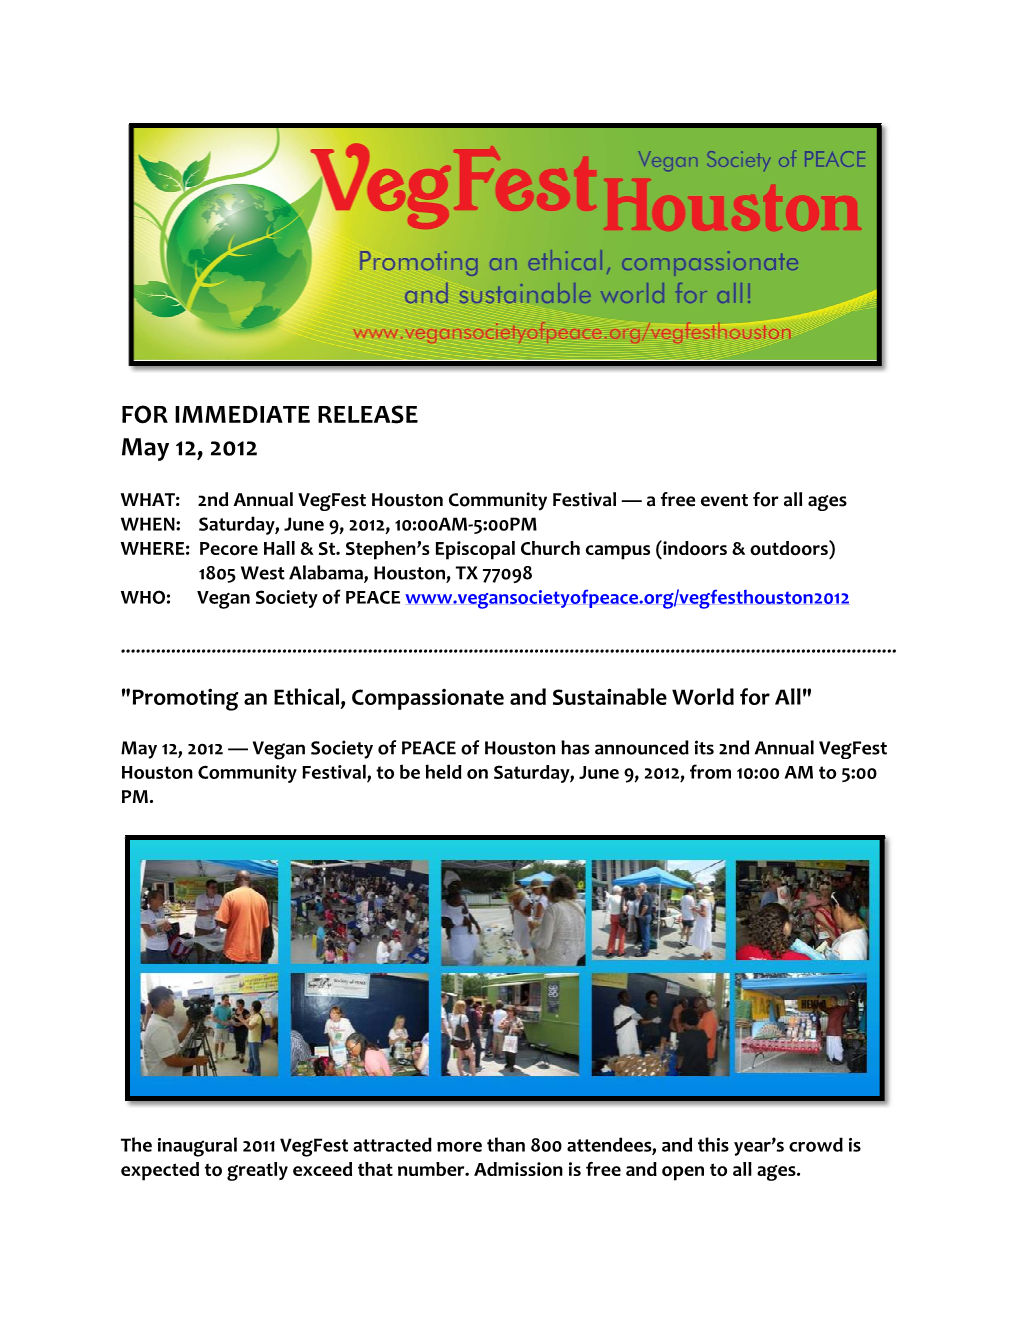 Official Press Release from Vegan Society of P.E.A.C.E